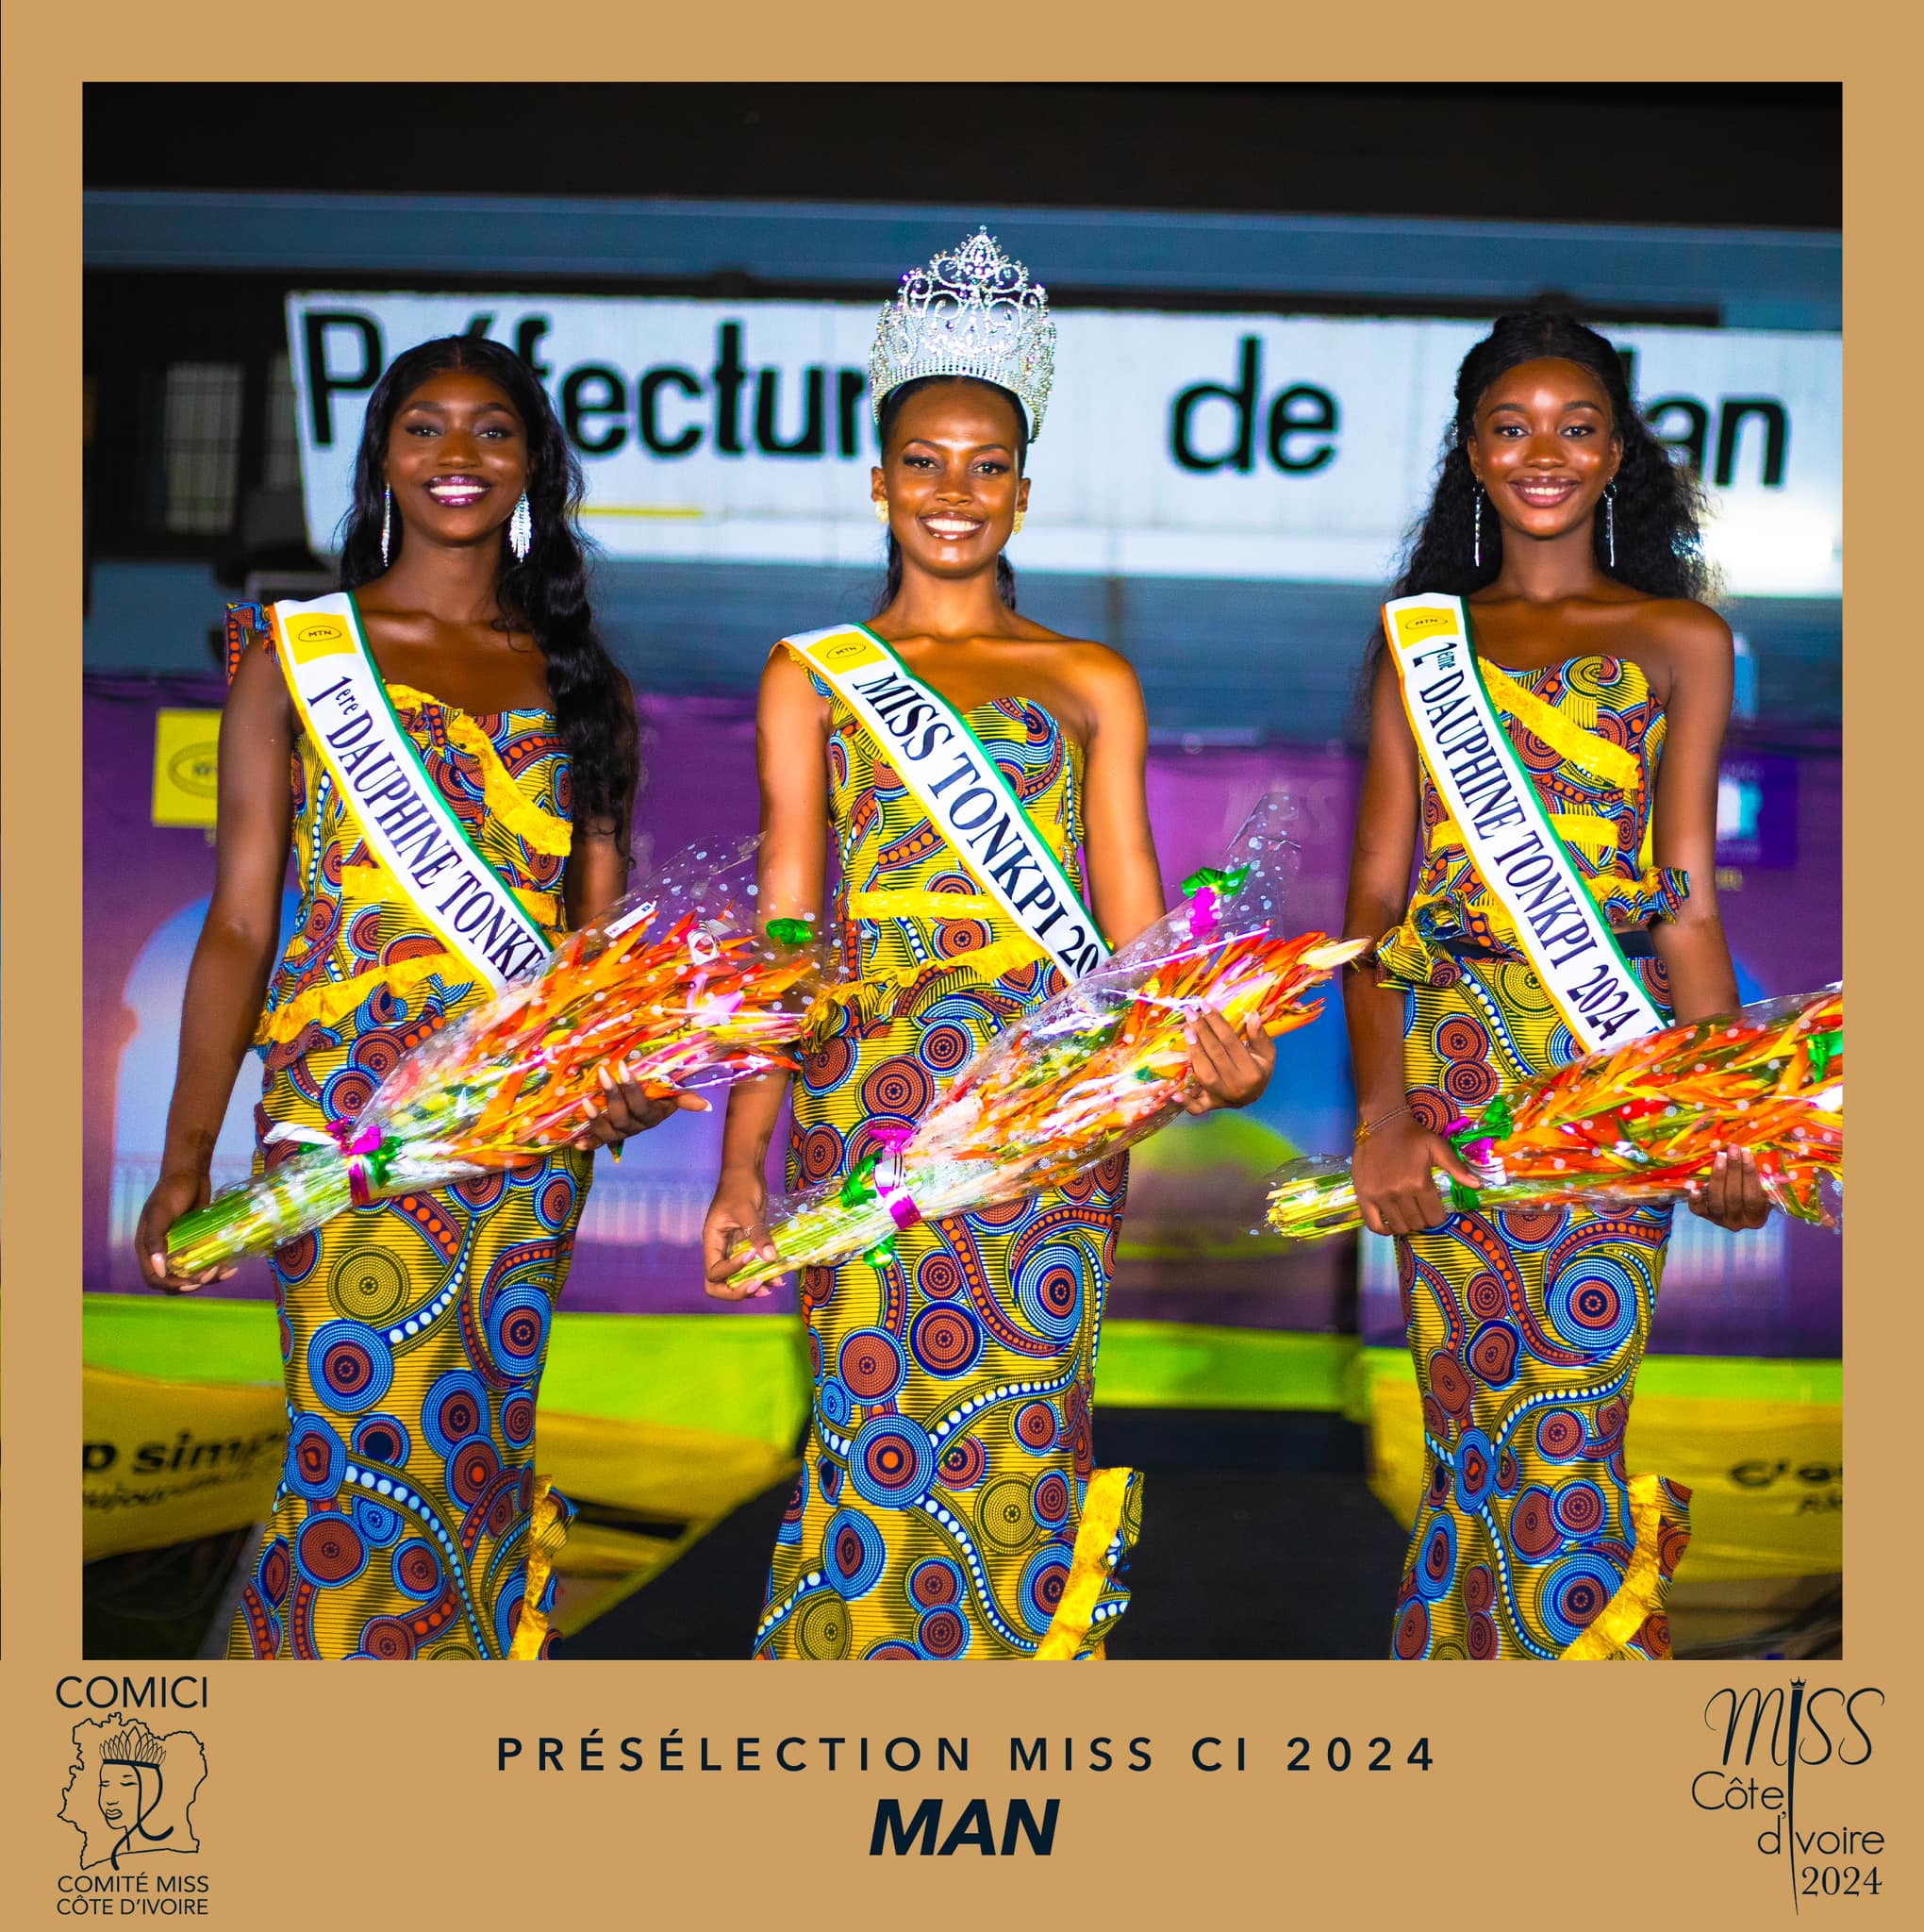 Preselection 11 Miss Cote d'Ivoire 2024 -  Finalist  Miss Man  from District Tonkpi - May 05 2024 - Miss Man 2024 is N°1 Miss OTAYECK Jeanne